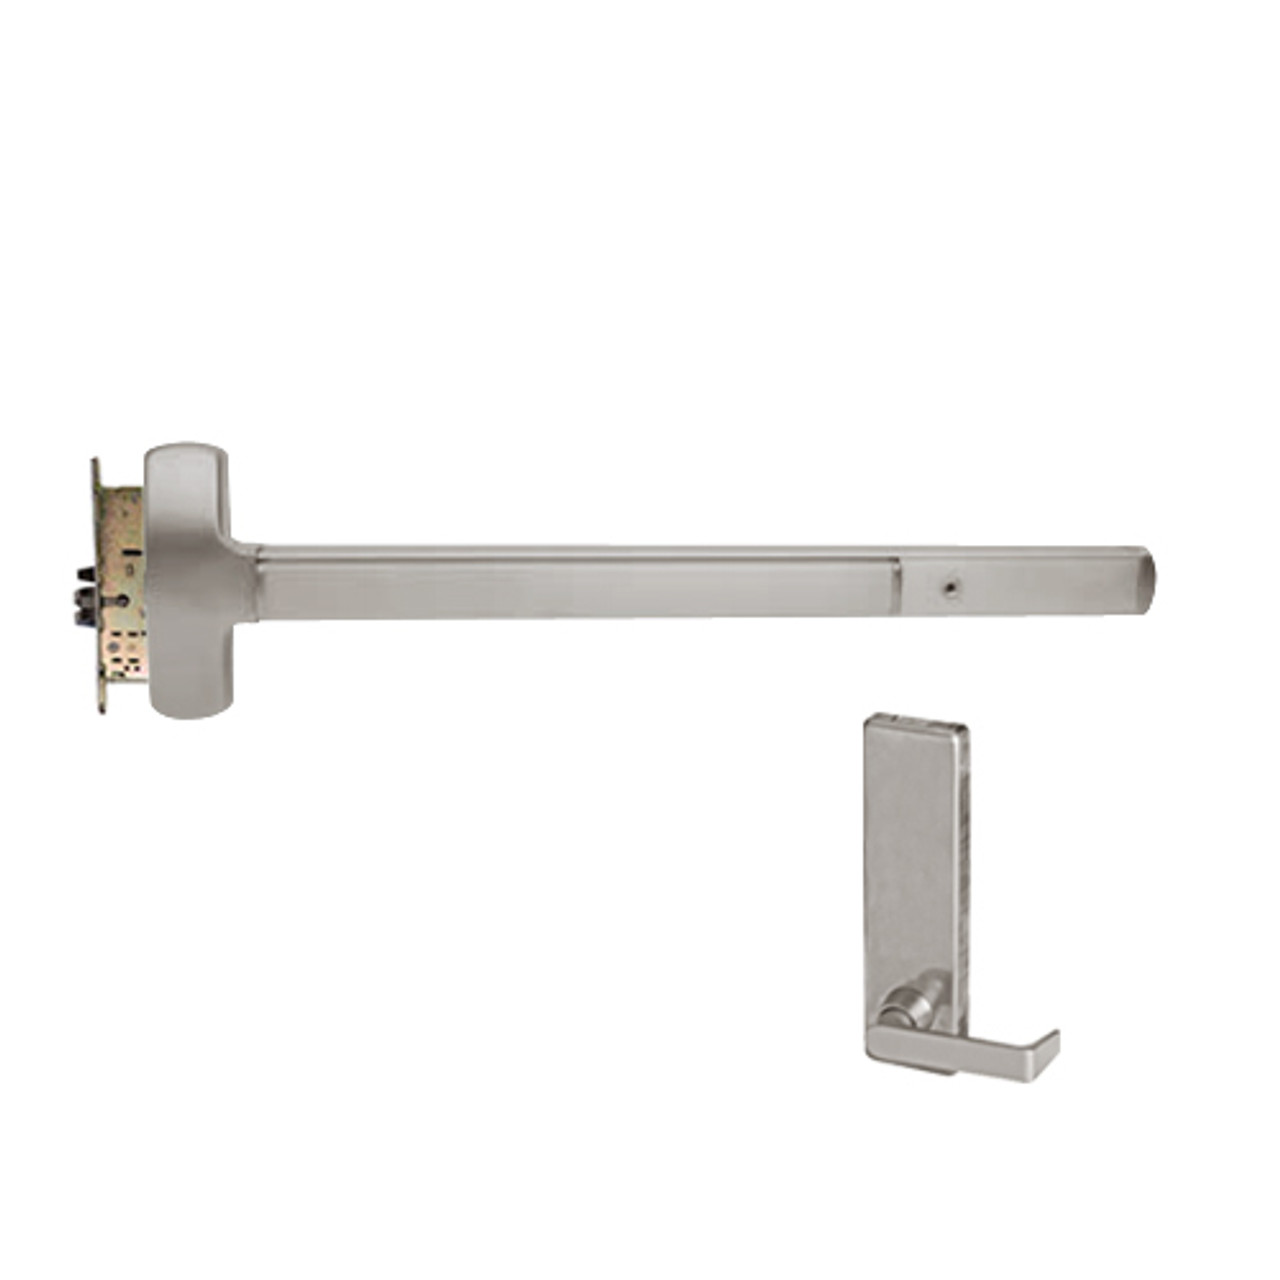 25-M-L-BE-DANE-US32D-3-RHR Falcon Exit Device in Satin Stainless Steel